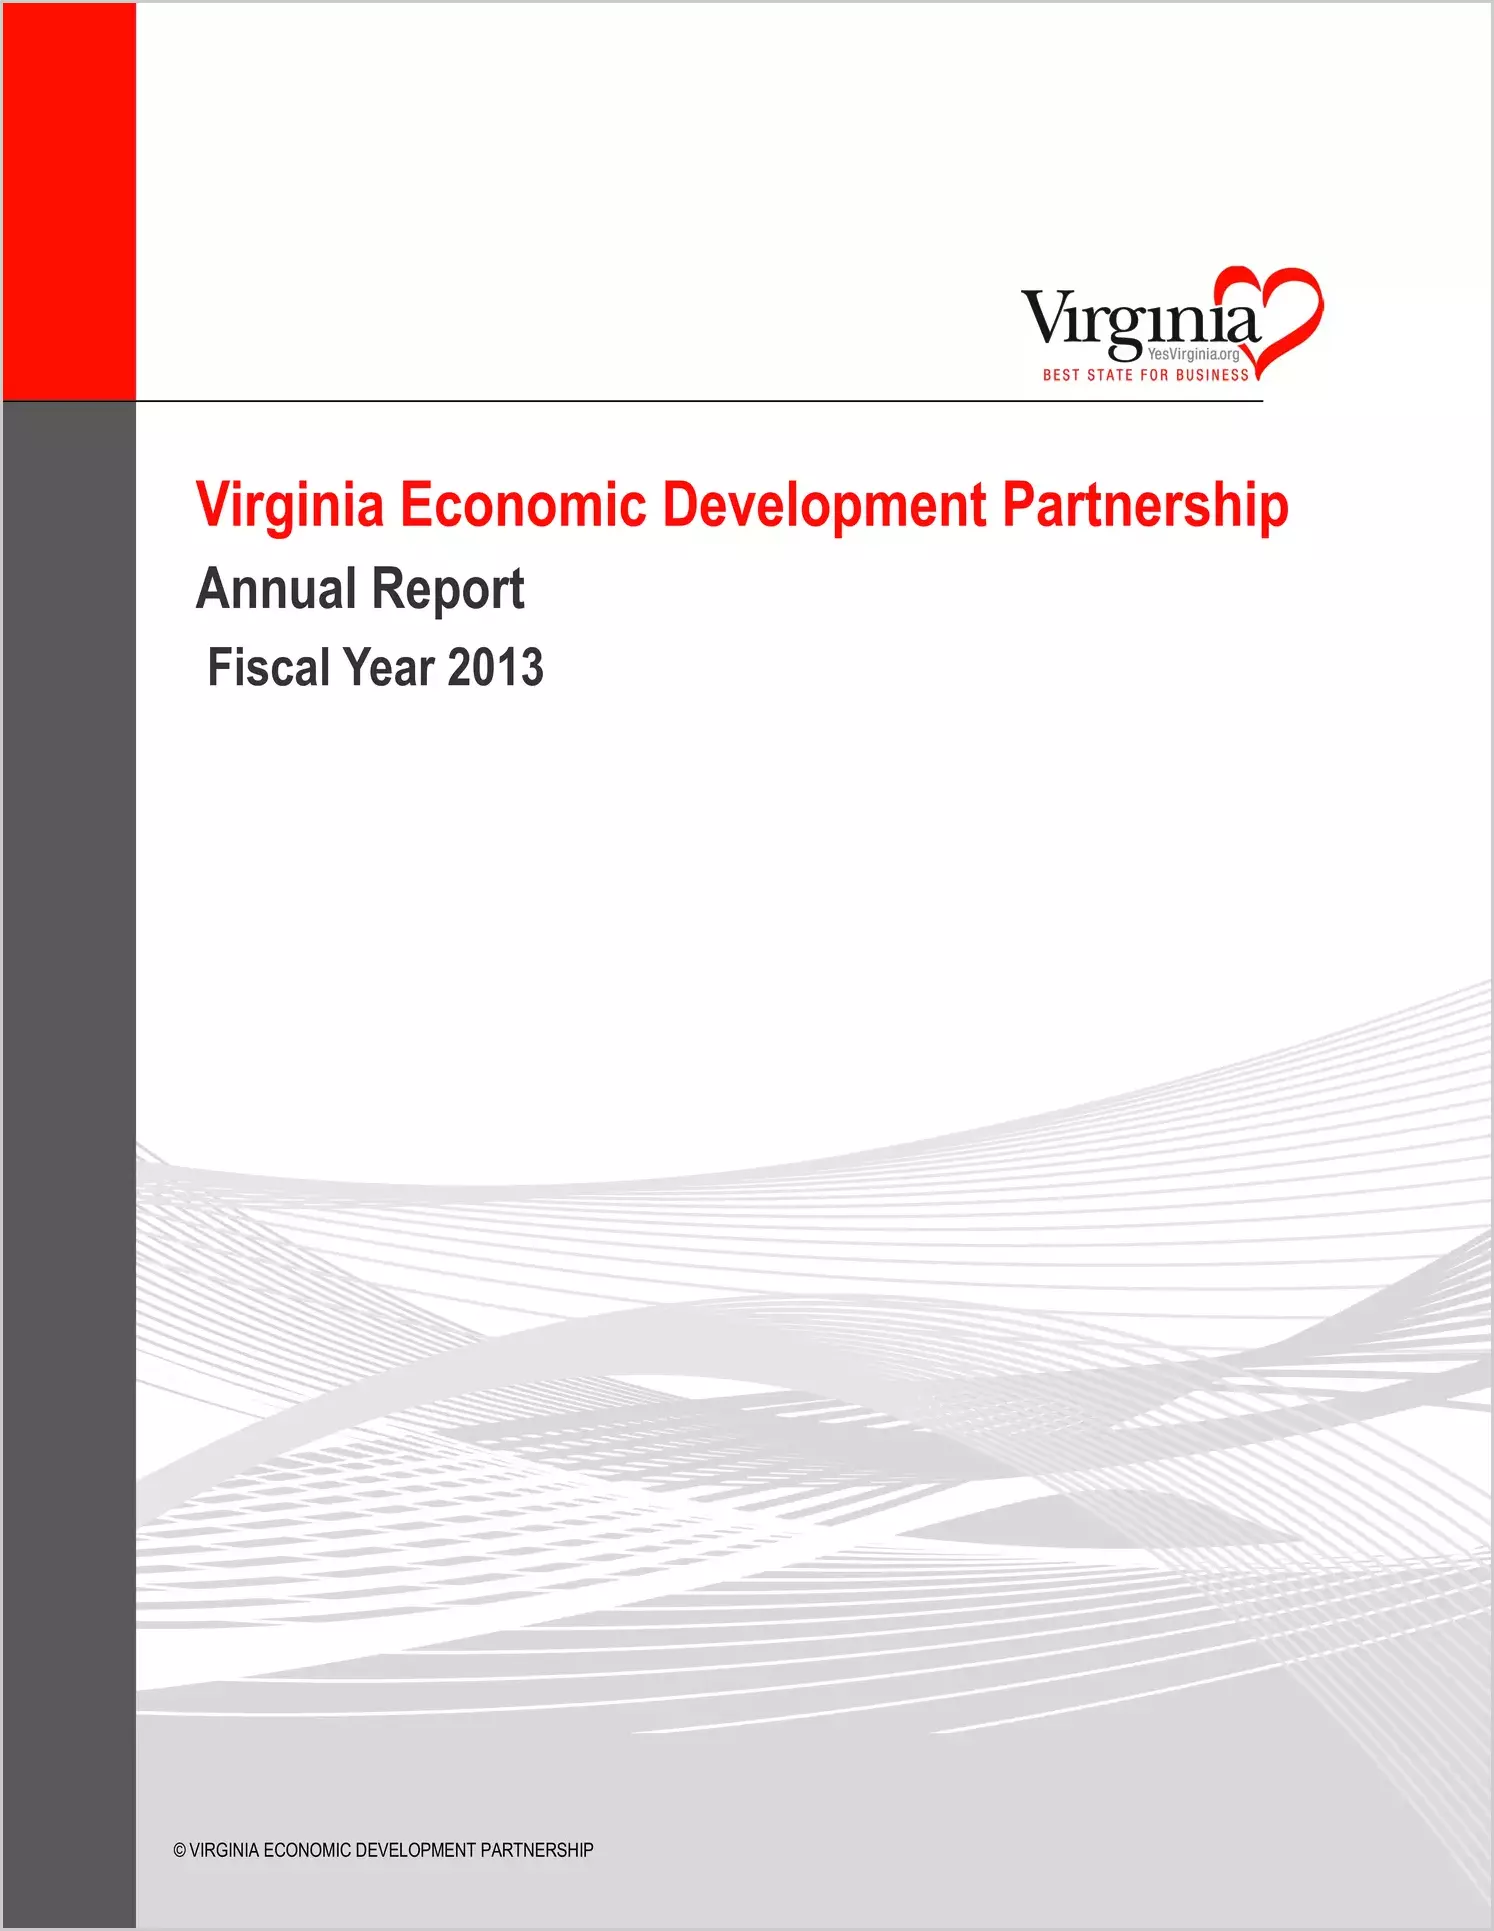 Virginia Economic Development Partnership Financial Statements for the year ended June 30, 2013